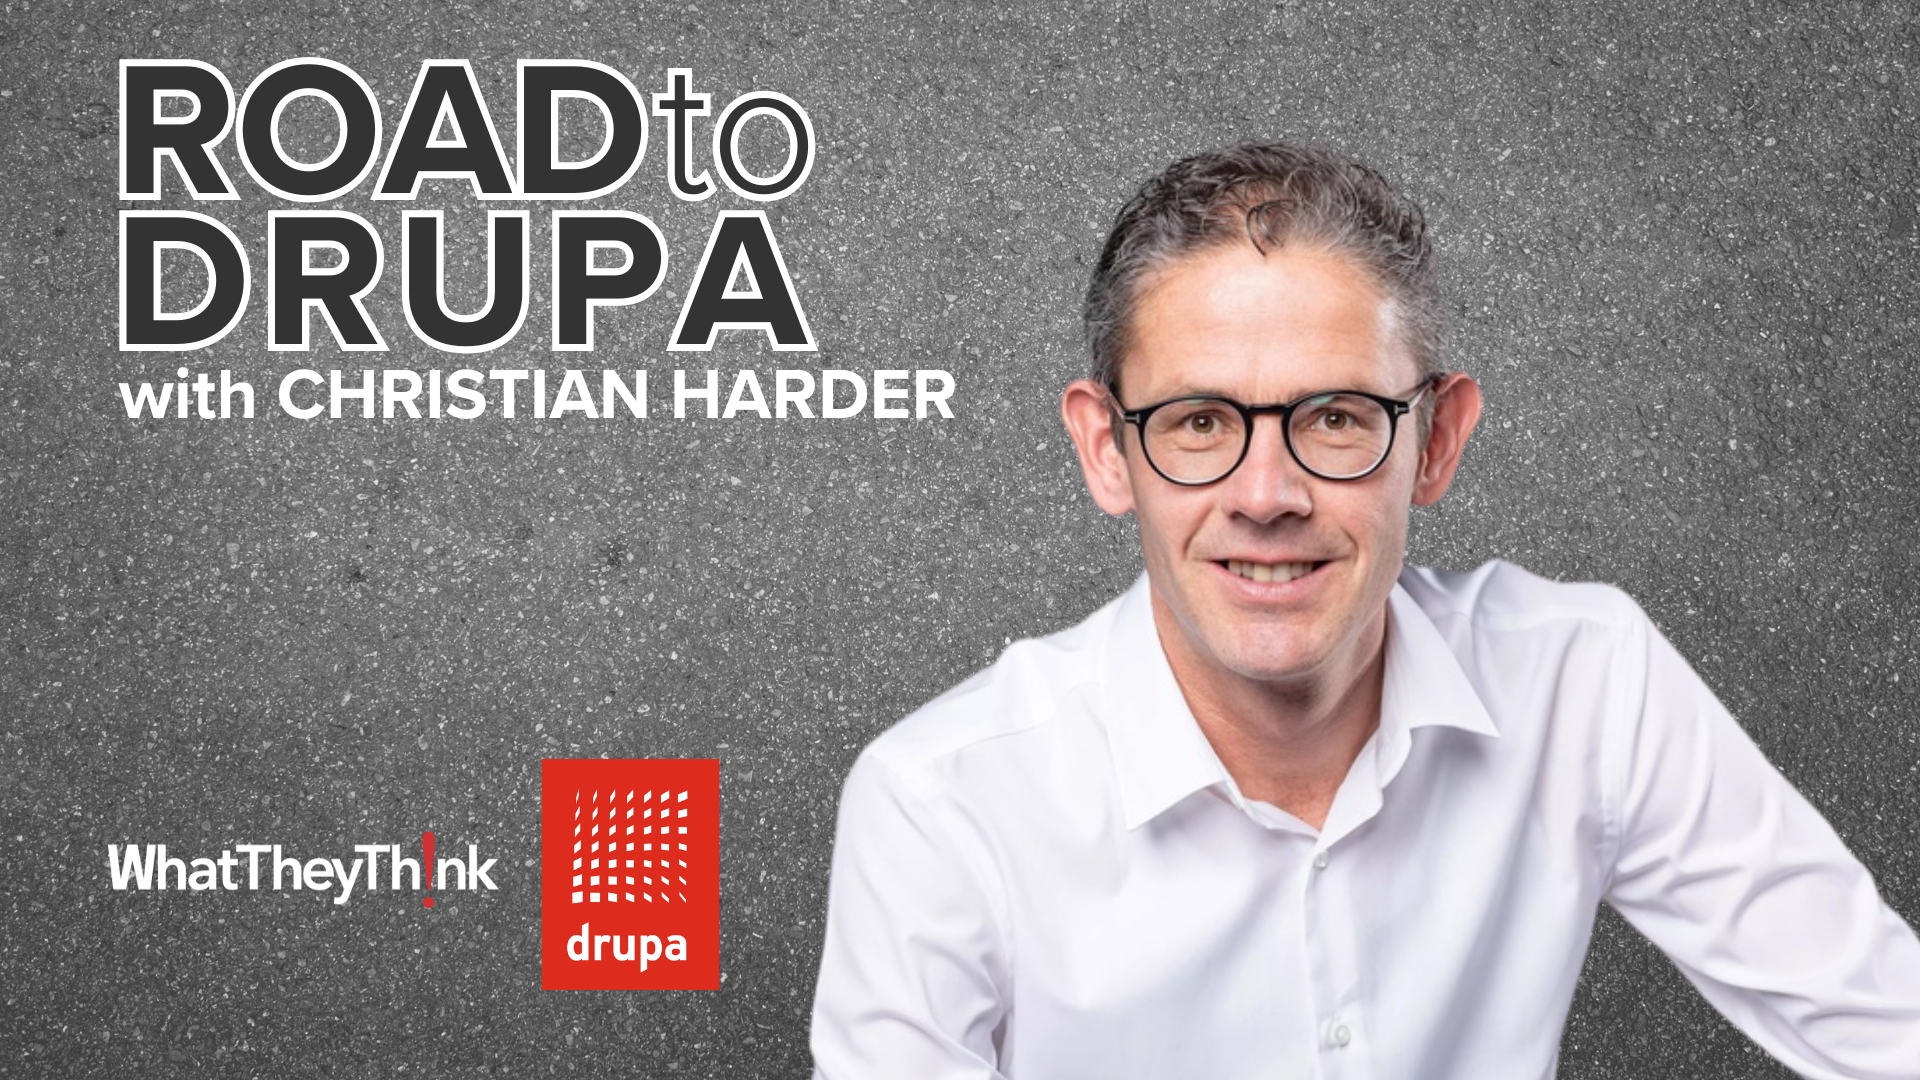 Video preview: Road to drupa: Durst Group's Christian Harder